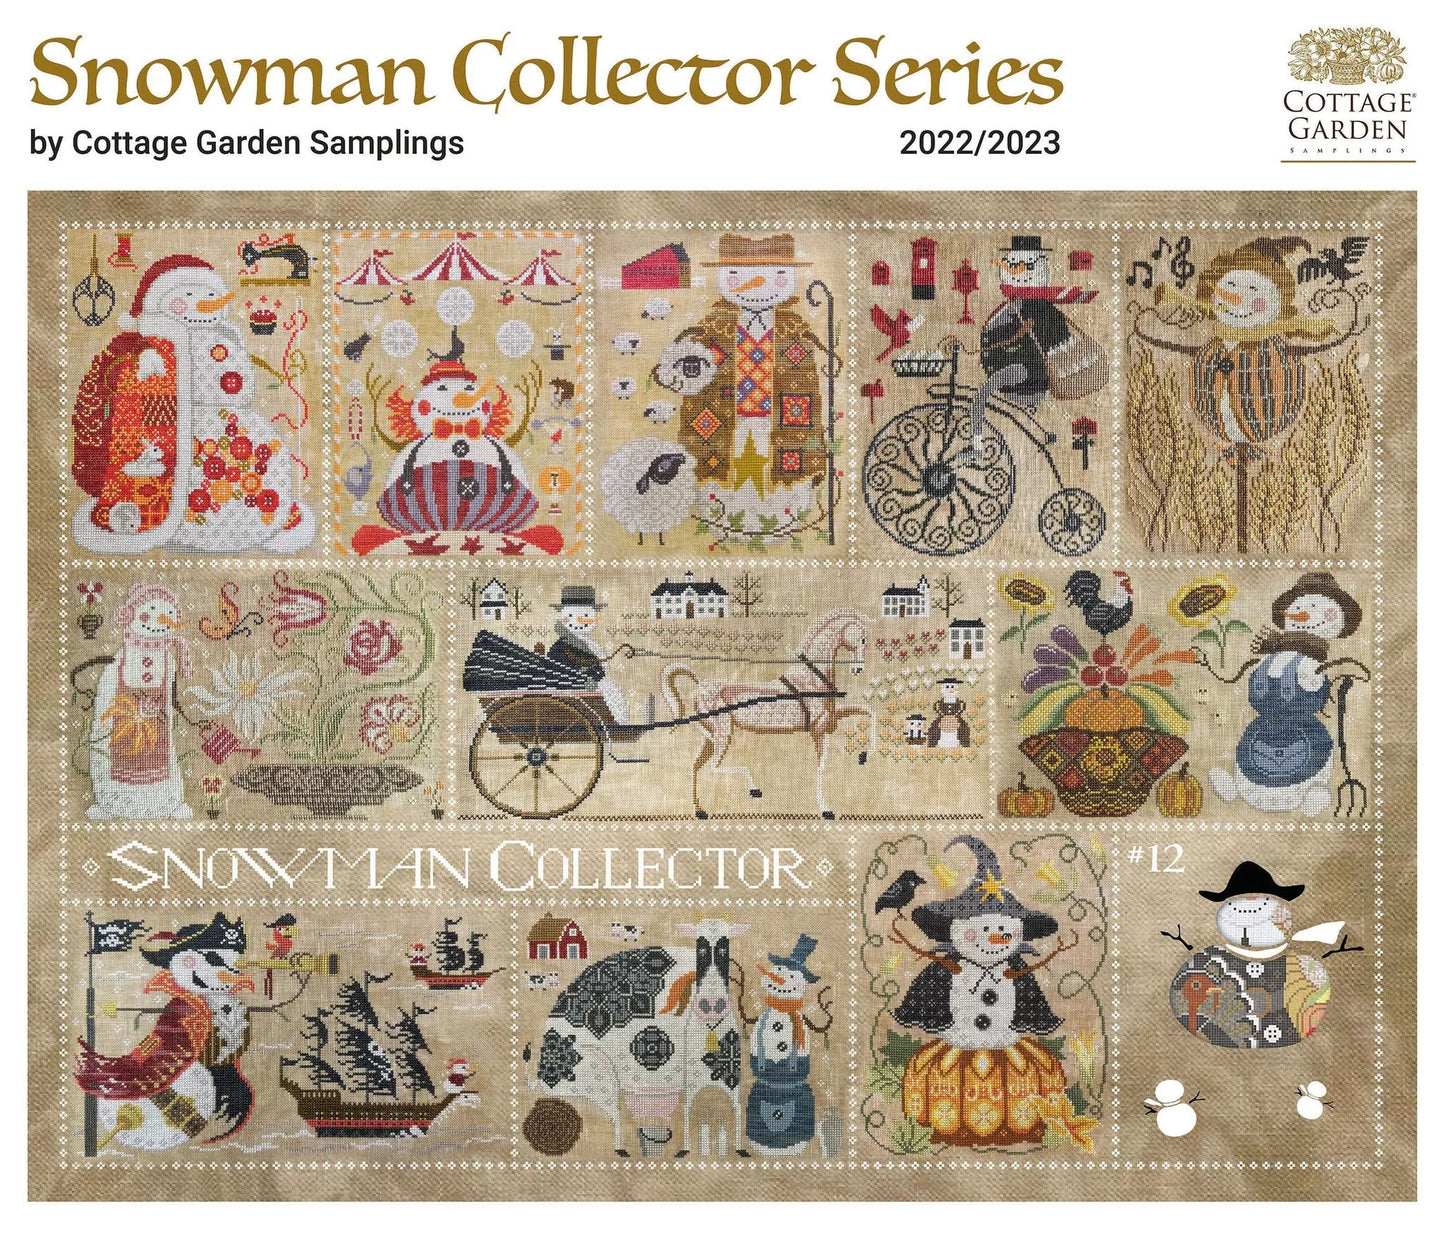 The Witch #11 -  The Snowman Collector's Series 2022-2023 - Cottage Garden Samplings - Cross Stitch Pattern, Needlecraft Patterns, Needlecraft Patterns, The Crafty Grimalkin - A Cross Stitch Store